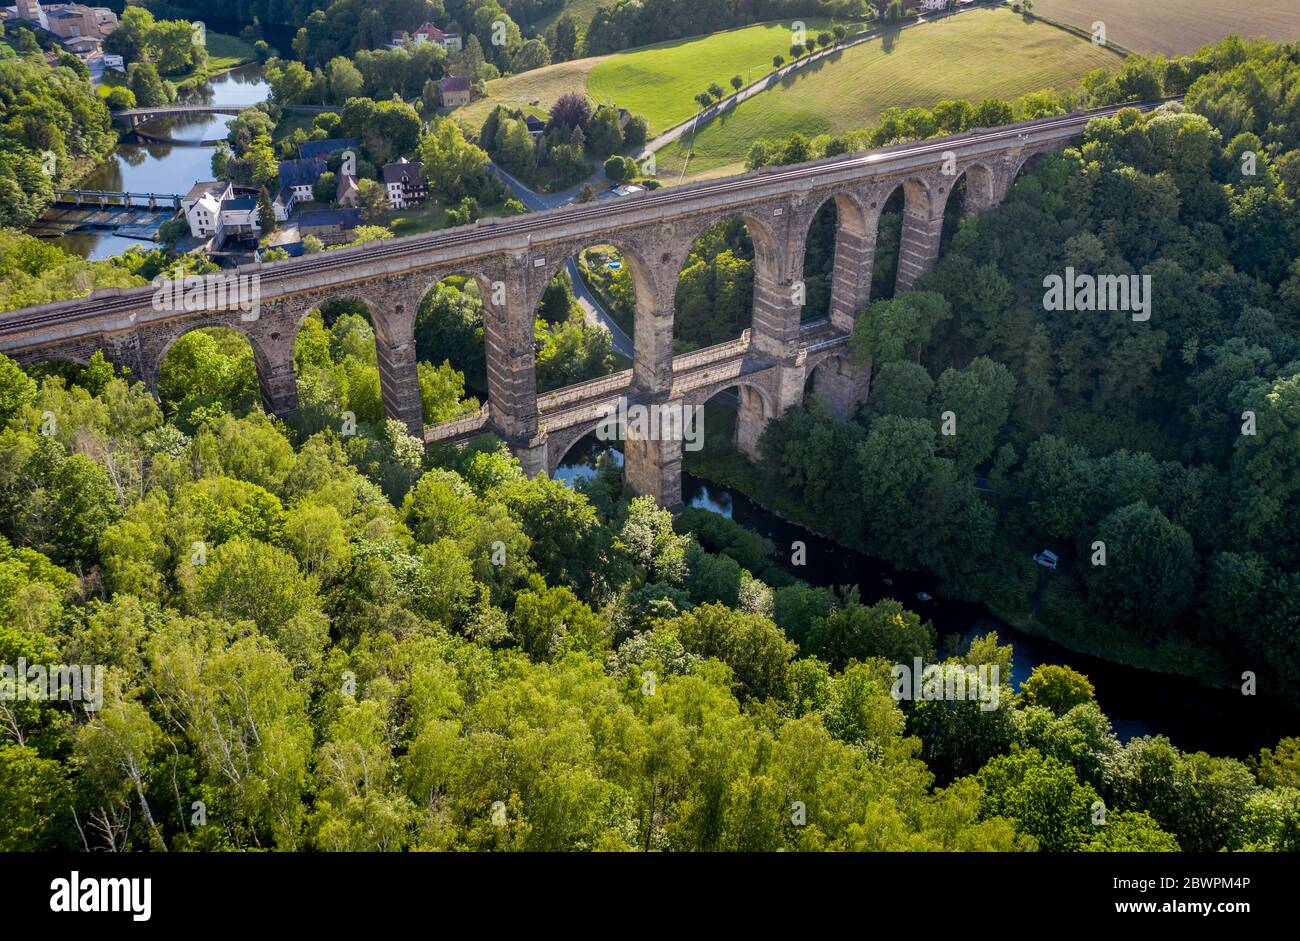 14 September 2017, Saxony, Göhren: With the Göhren Viaduct, the Leipzig-Chemnitz railway line crosses the Zwickauer Mulde. The railway bridge, originally 512 metres long and 68 metres high, is the third largest of these structures in Saxony. For years, only regional trains have been running on the only slightly electrified line between Leipzig and Chemnitz. The planned expansion of the line will not begin until 2025 at the earliest. If conditions are favourable, the line could be double-tracked and electric power could be available three years later. (Aerial photograph with drone) Photo: Jan W Stock Photo